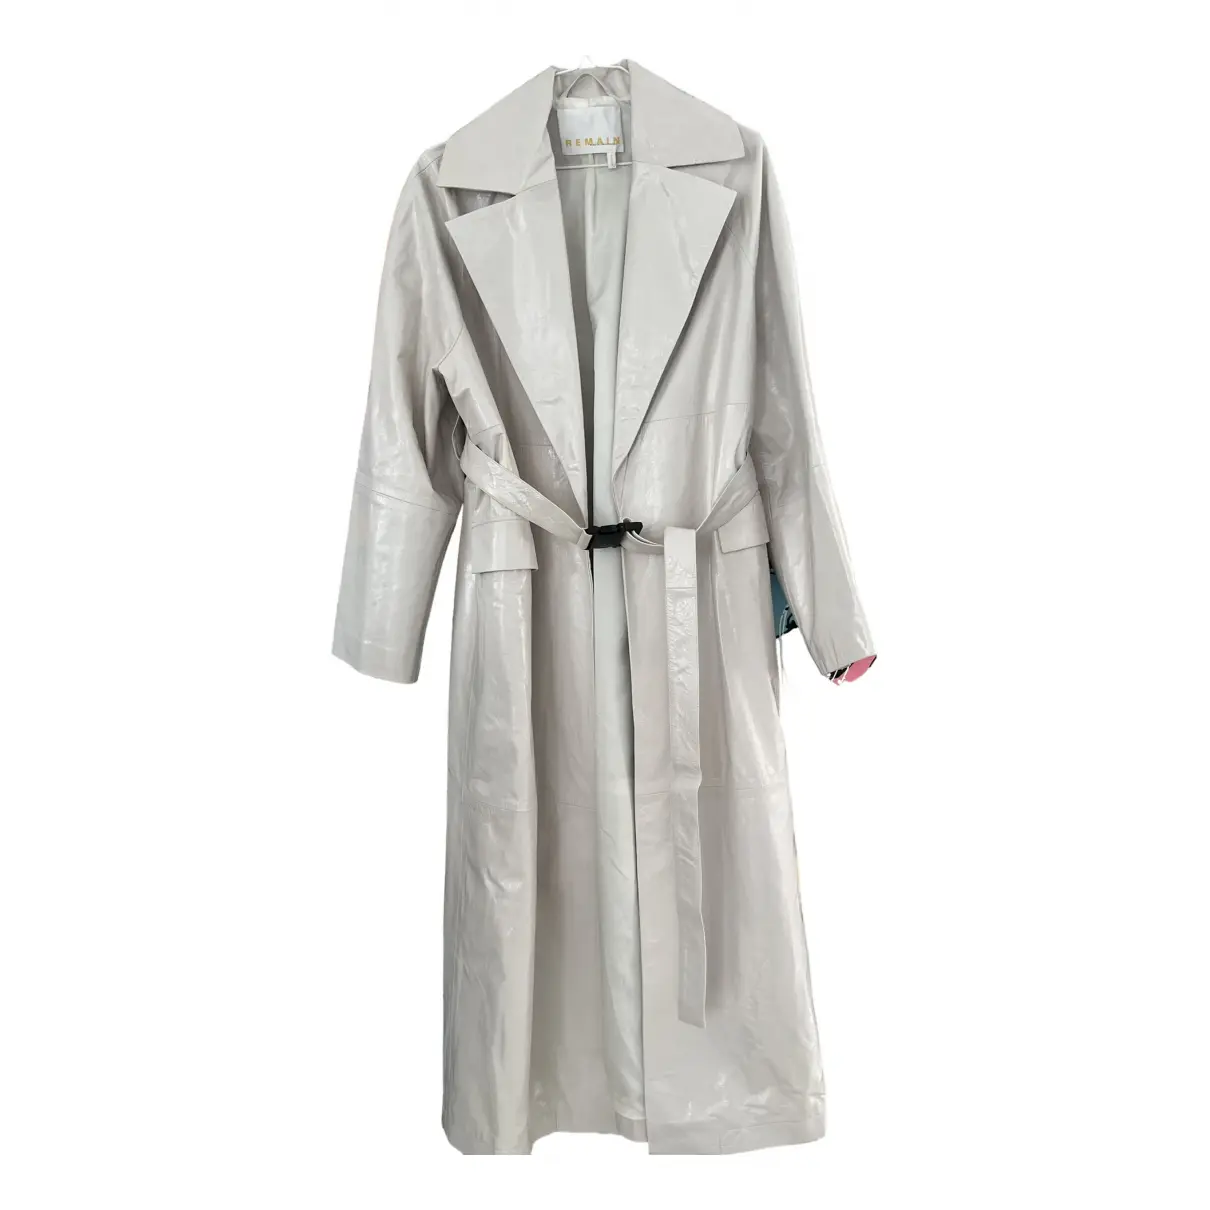 Leather trench coat Remain Biger christensen